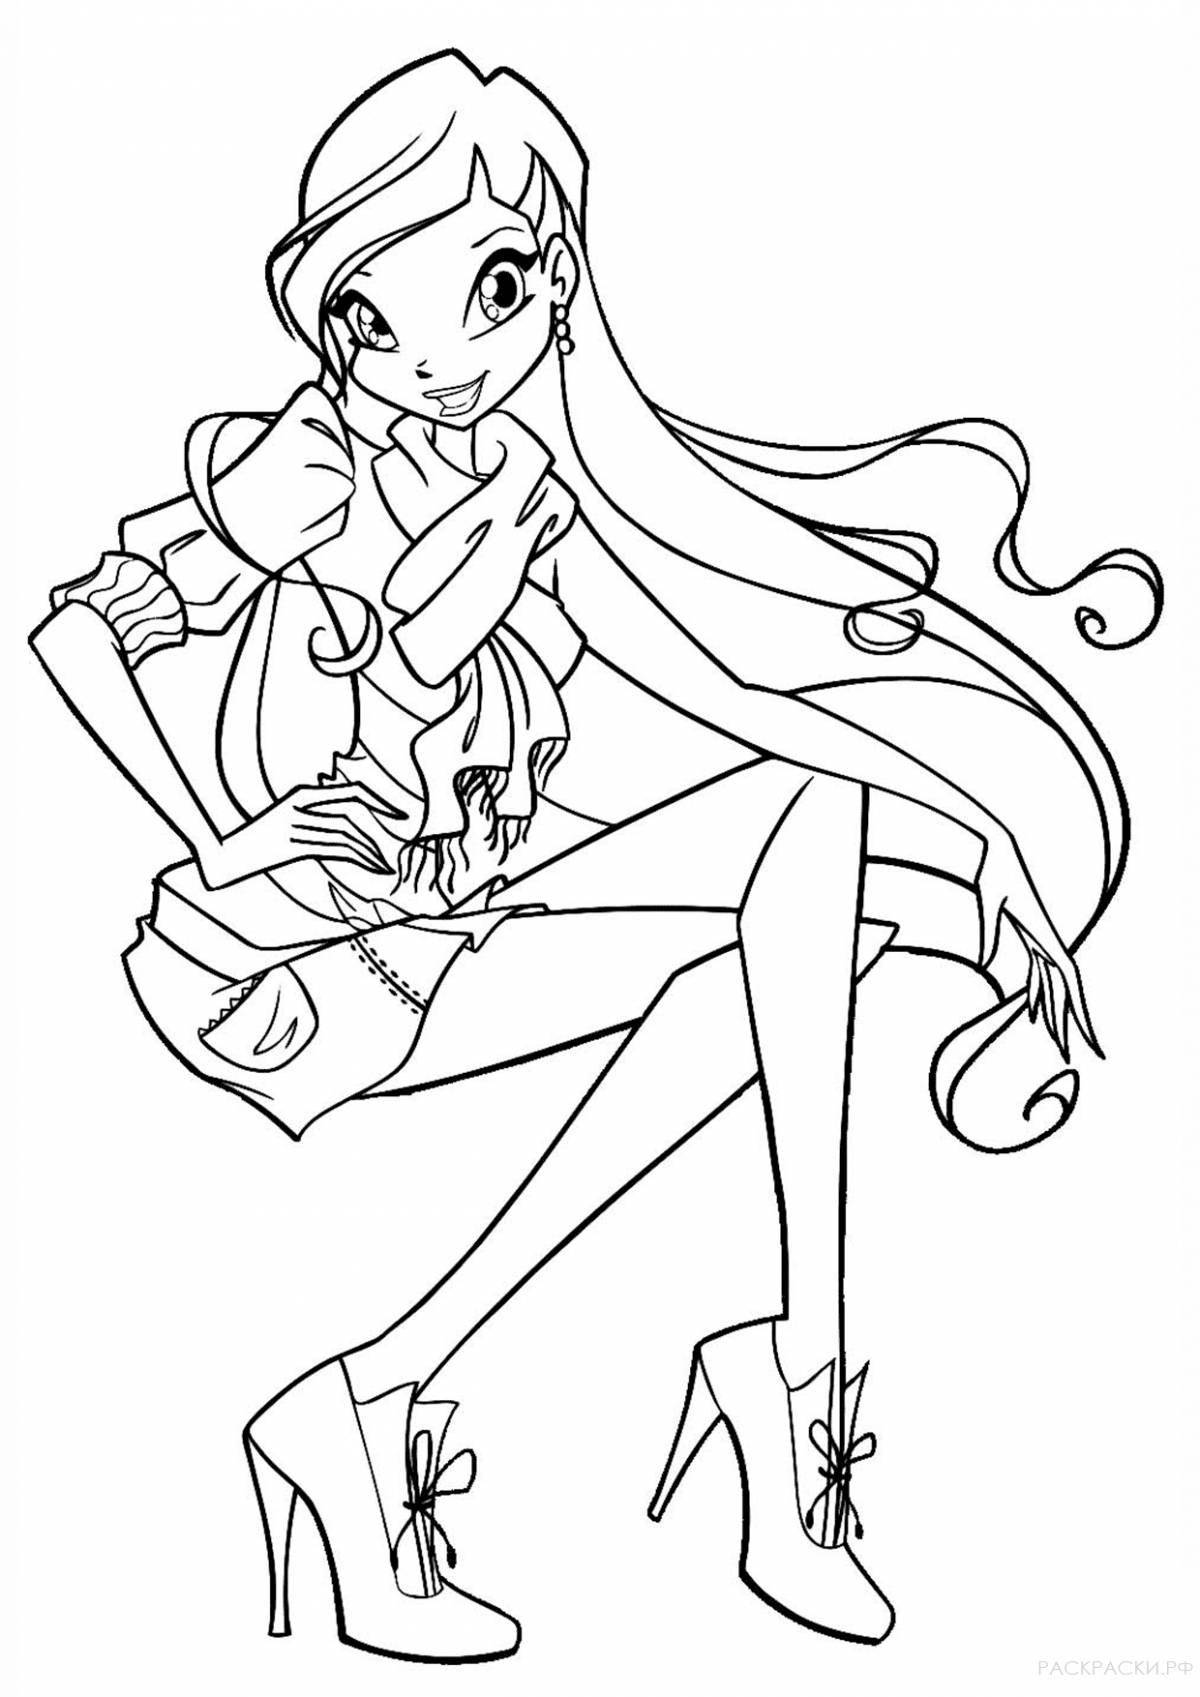 Amazing coloring pages of the winx fairy stella